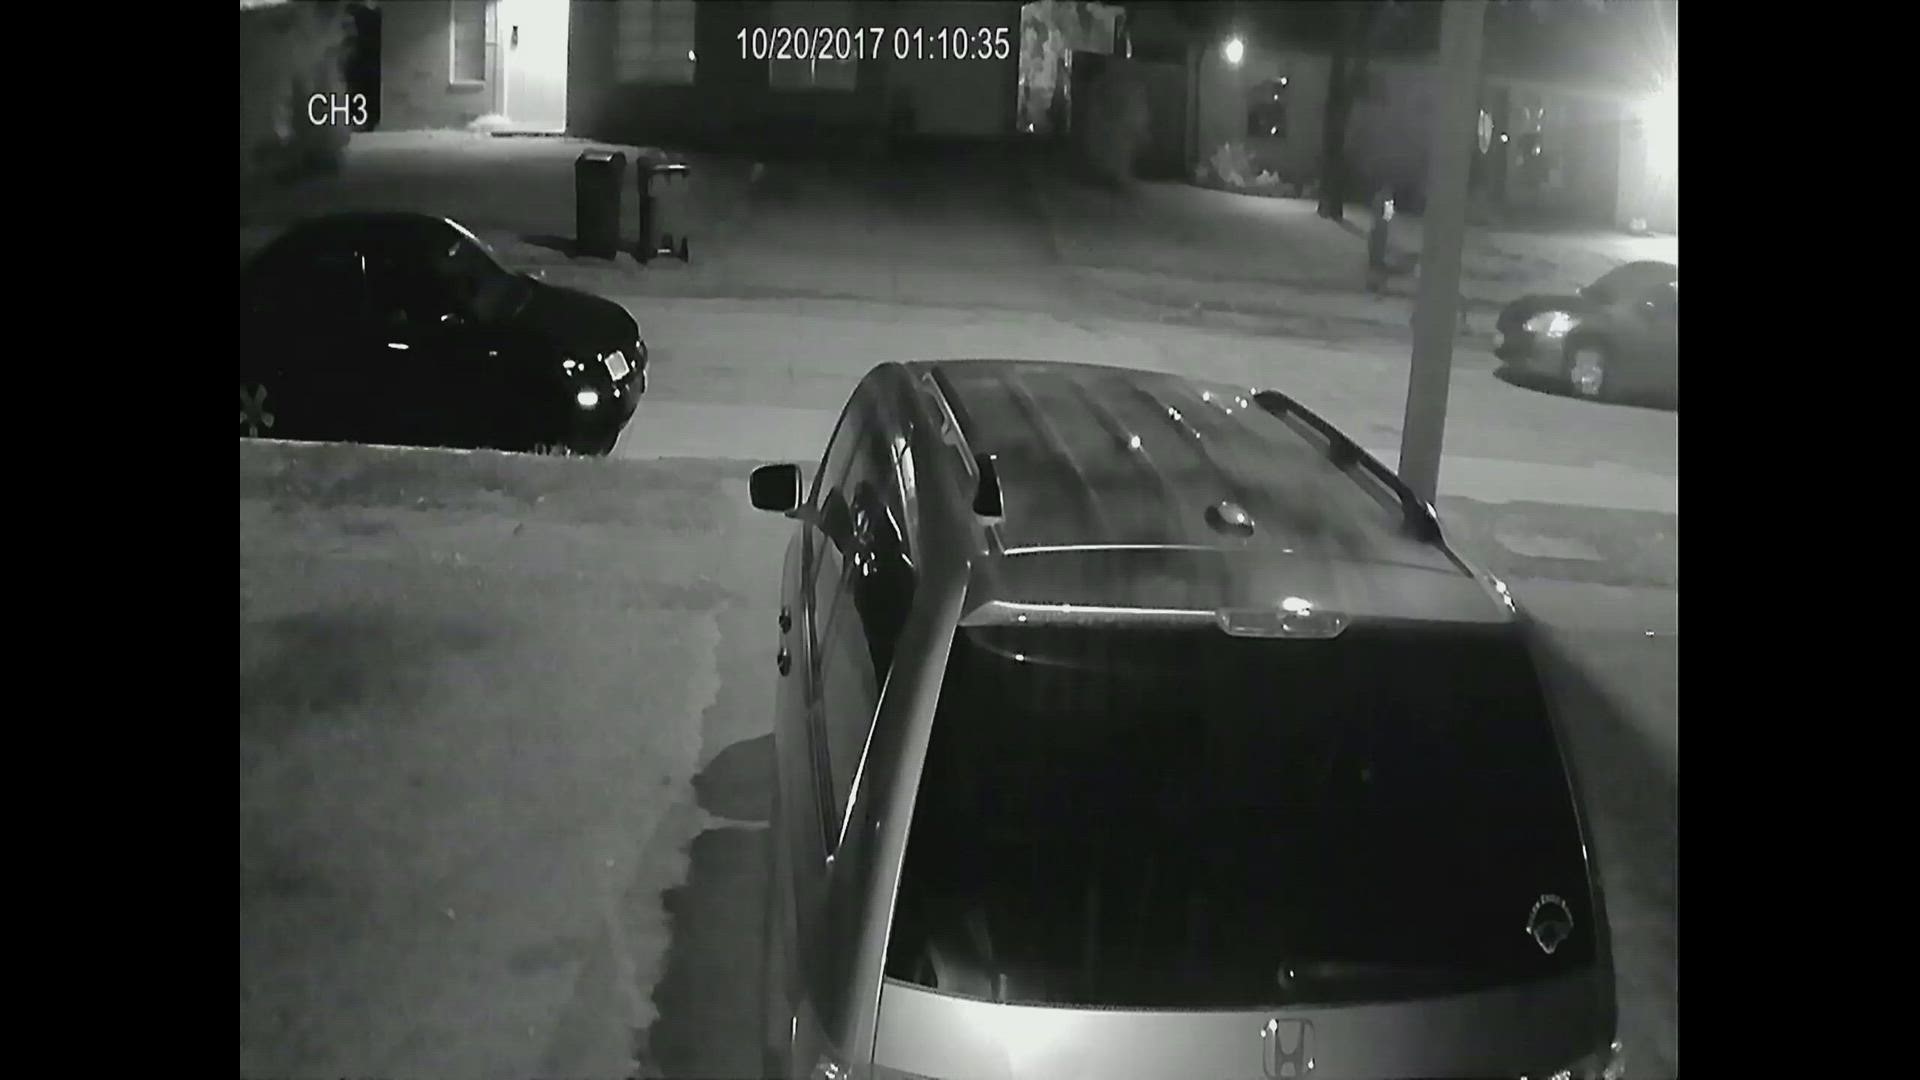 Officials said detective recovered surveillance video from a residence that showed two men and a small four-door passenger car near the murder scene.